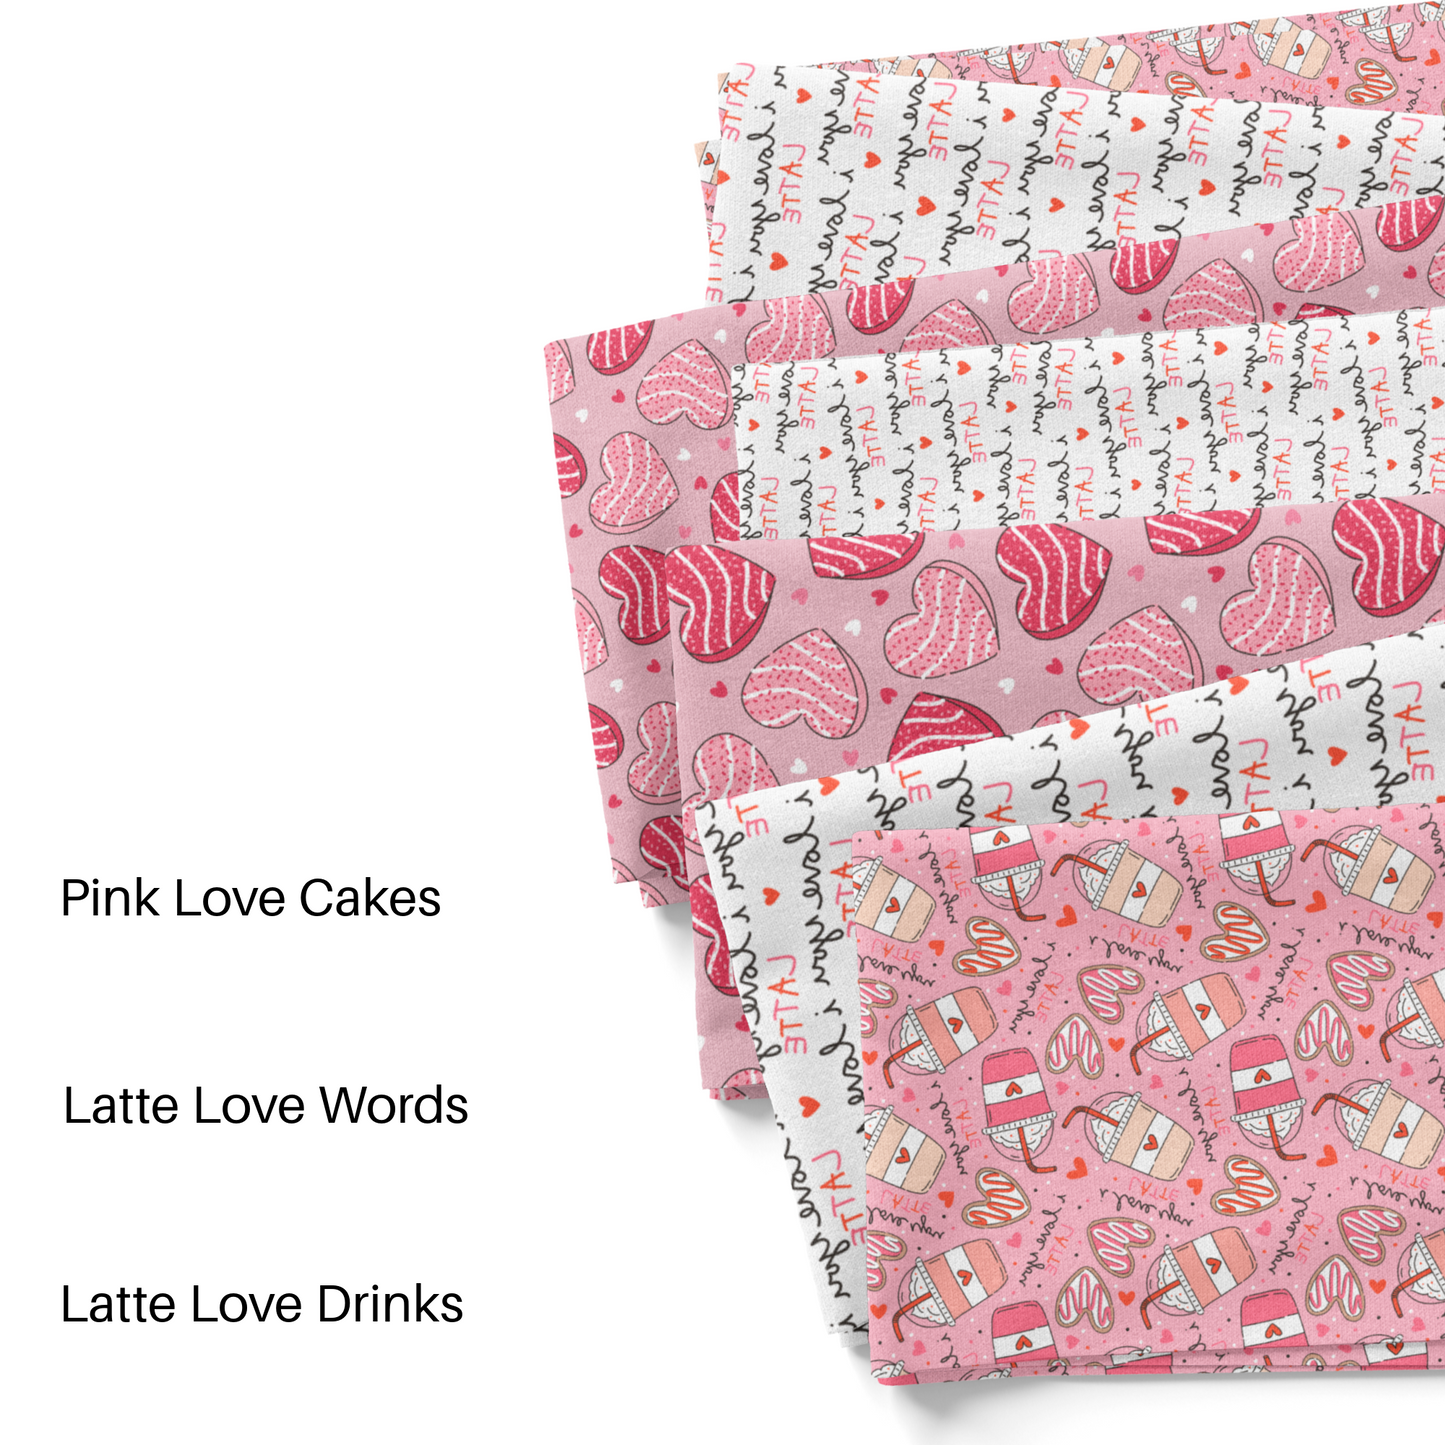 Sweet Shoppe Design Pink Valentine themed fabric by the yard swatches.